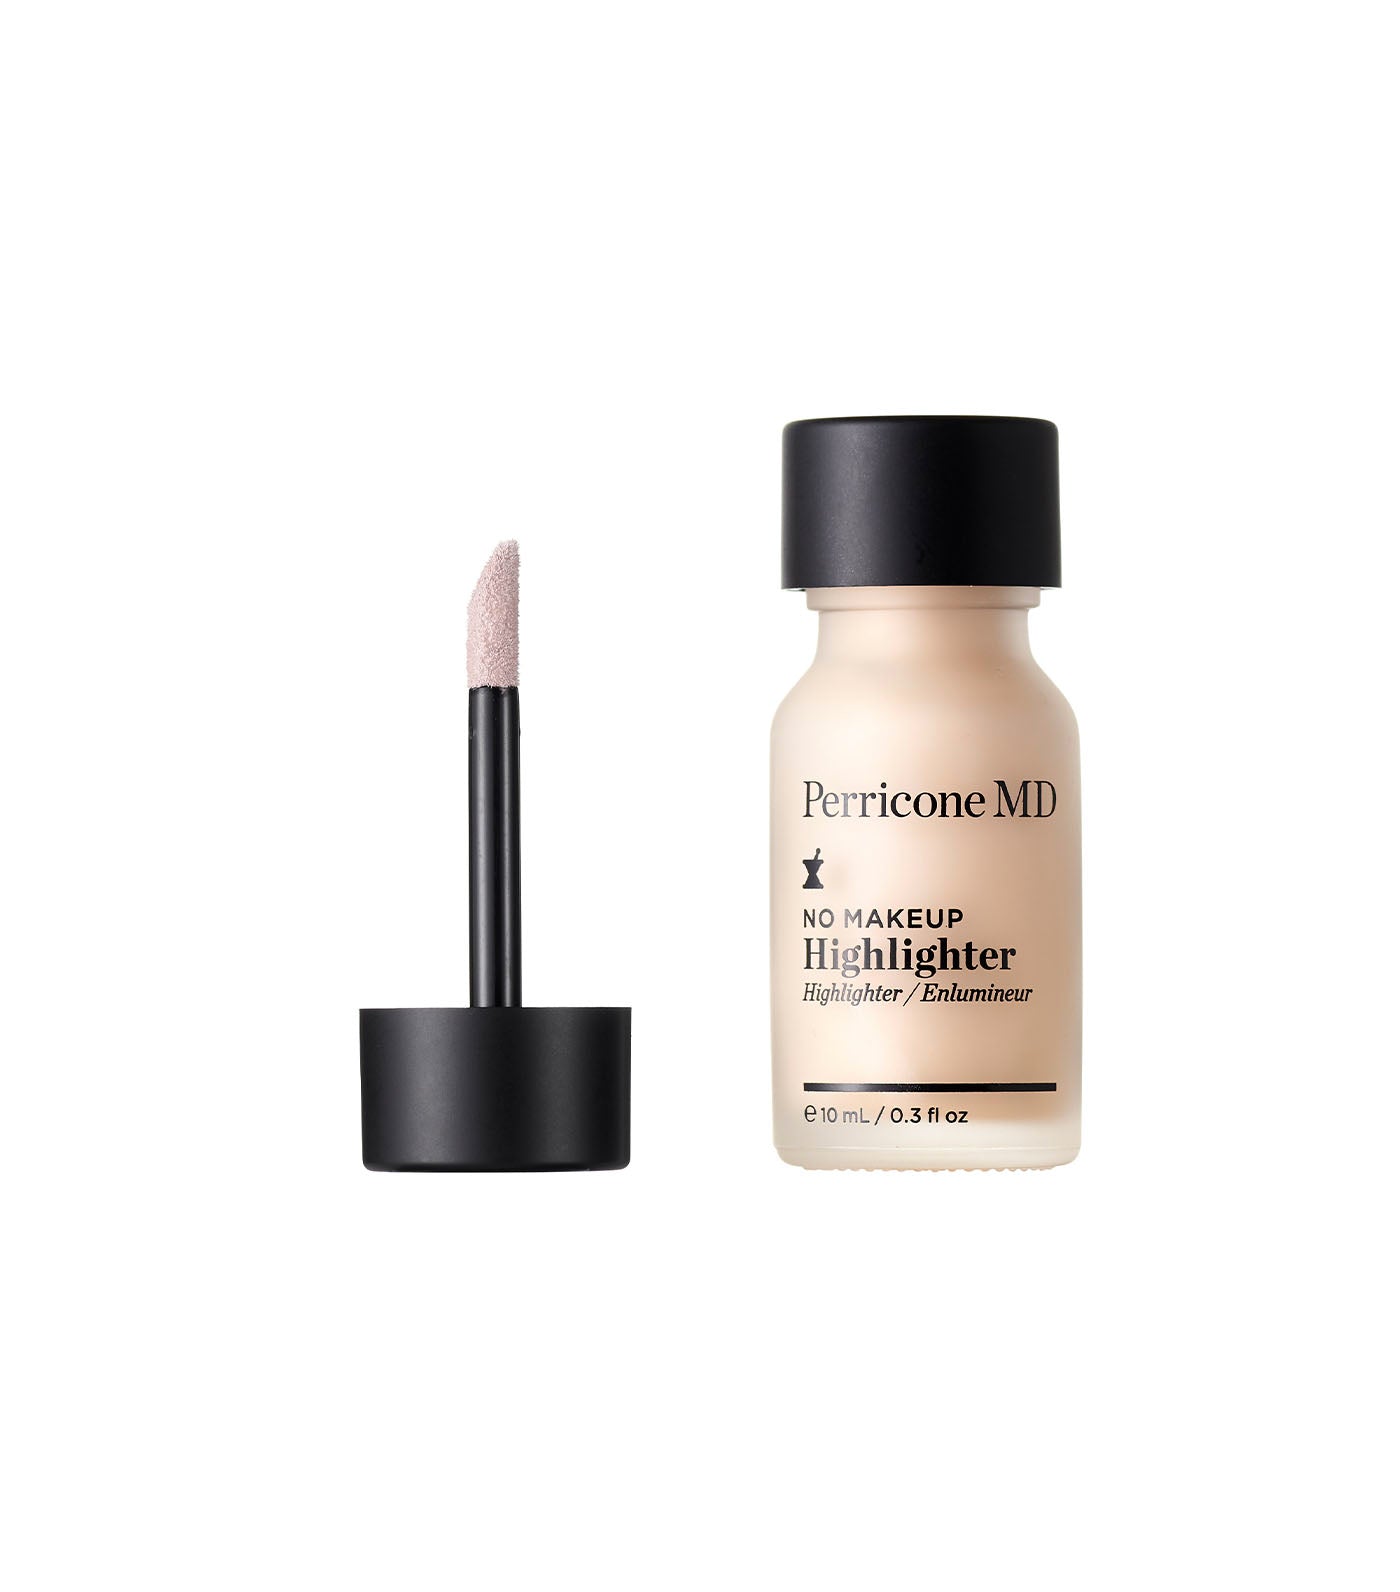 perricone md no makeup highlighter